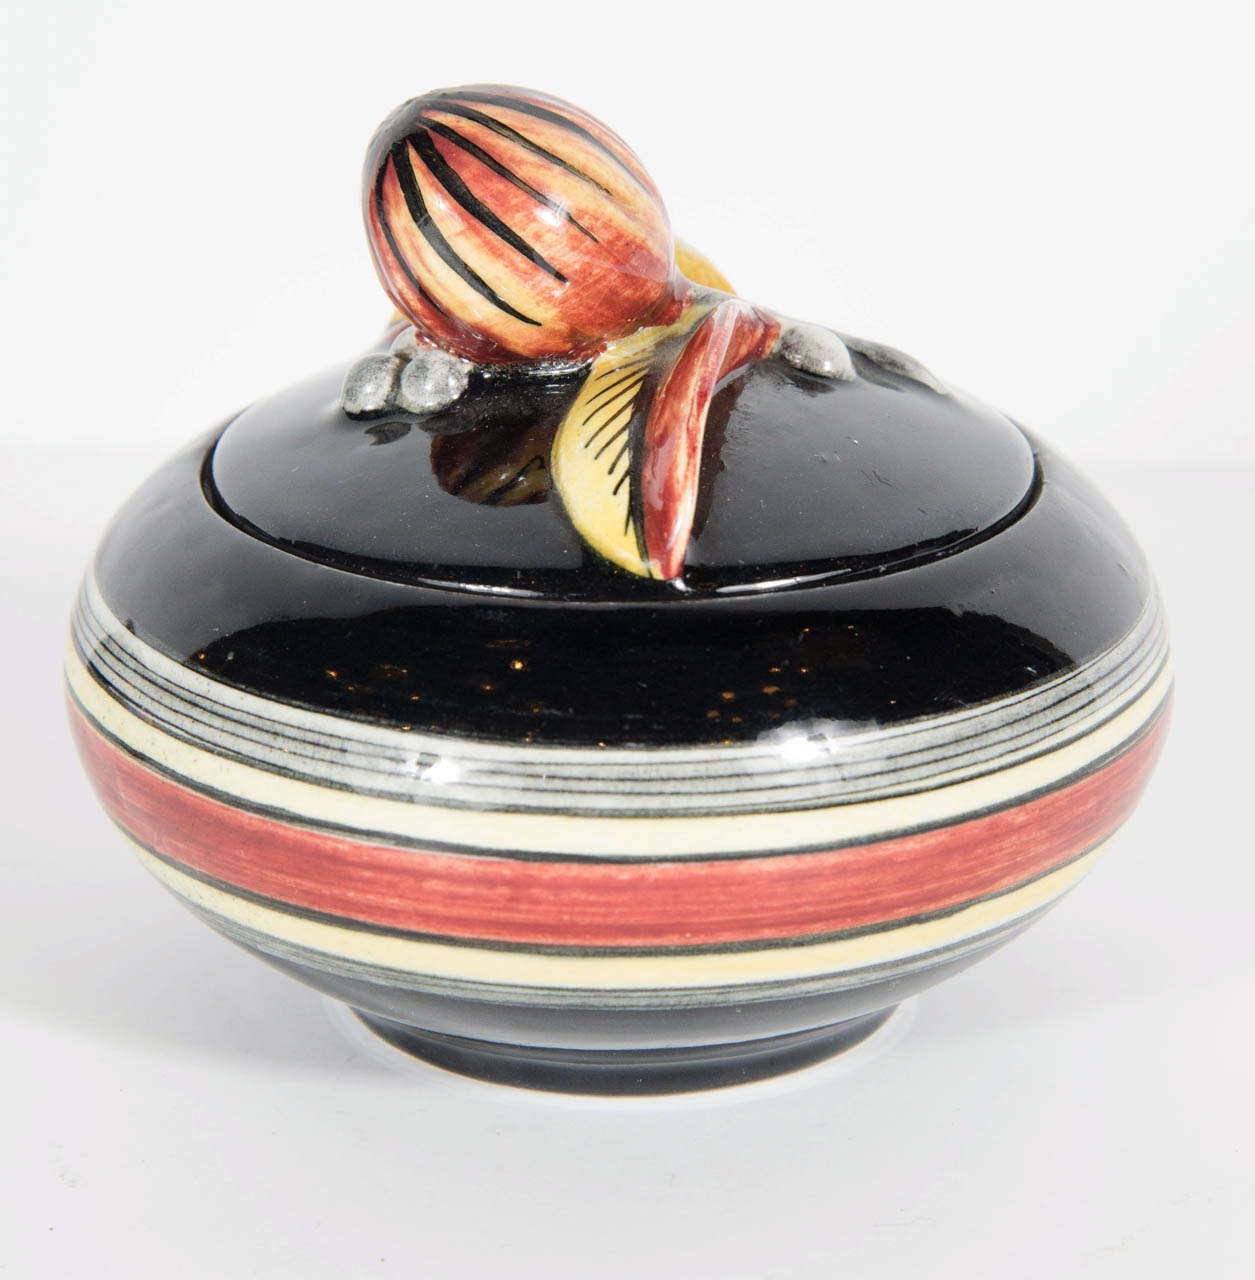 This special round form box features a stylized Art deco foliage design with hand painted accents in pale orange, blue, rust and black. It also features linear concentric detailing.Signed on the bottom with Ilse Claussens initials as well as as the